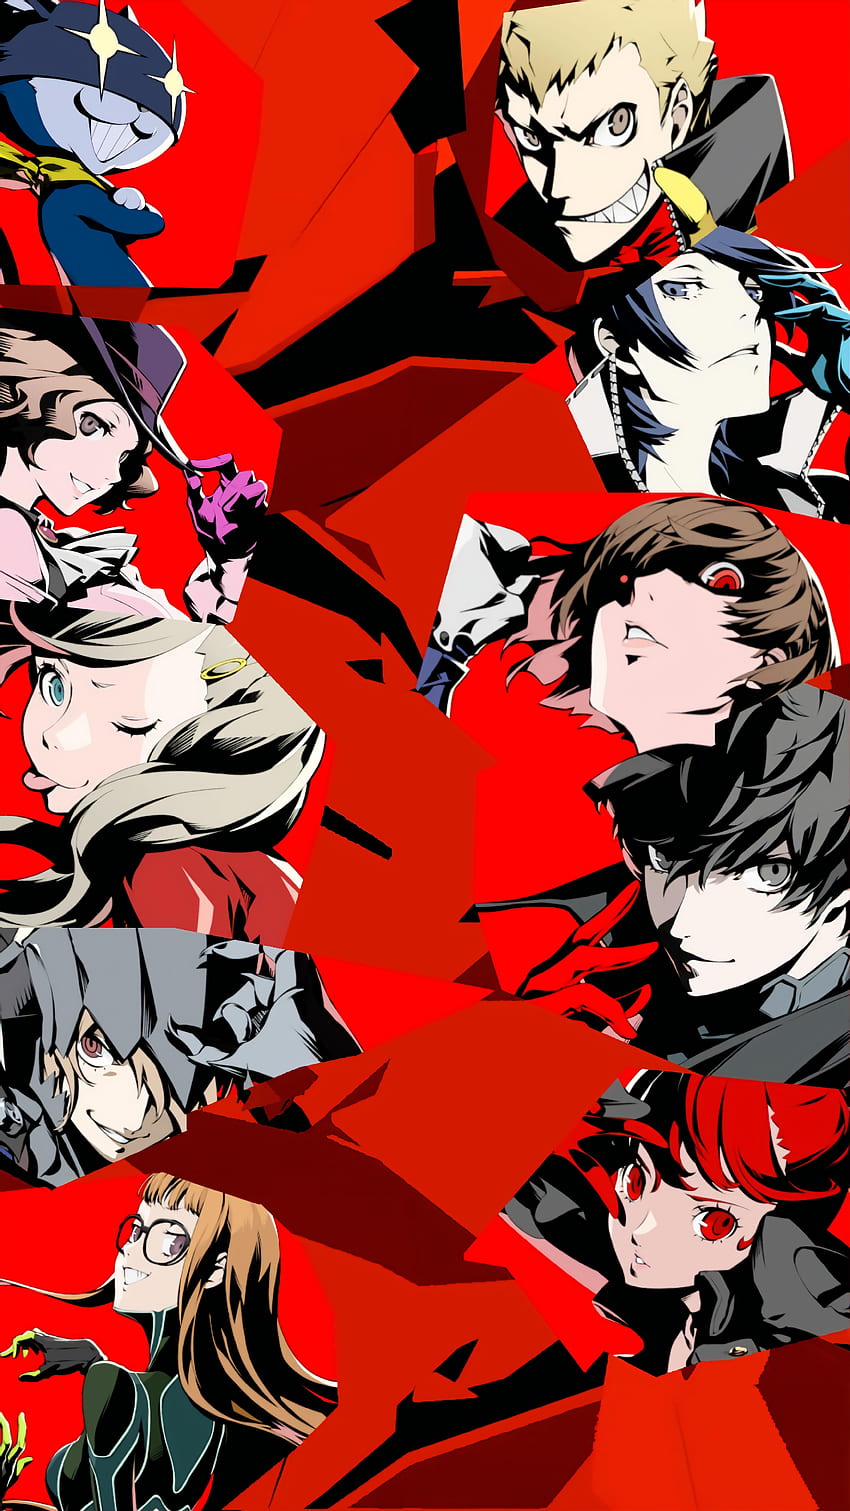 I used my mediocre editing skills to make a mobile, Persona 5 HD phone wallpaper